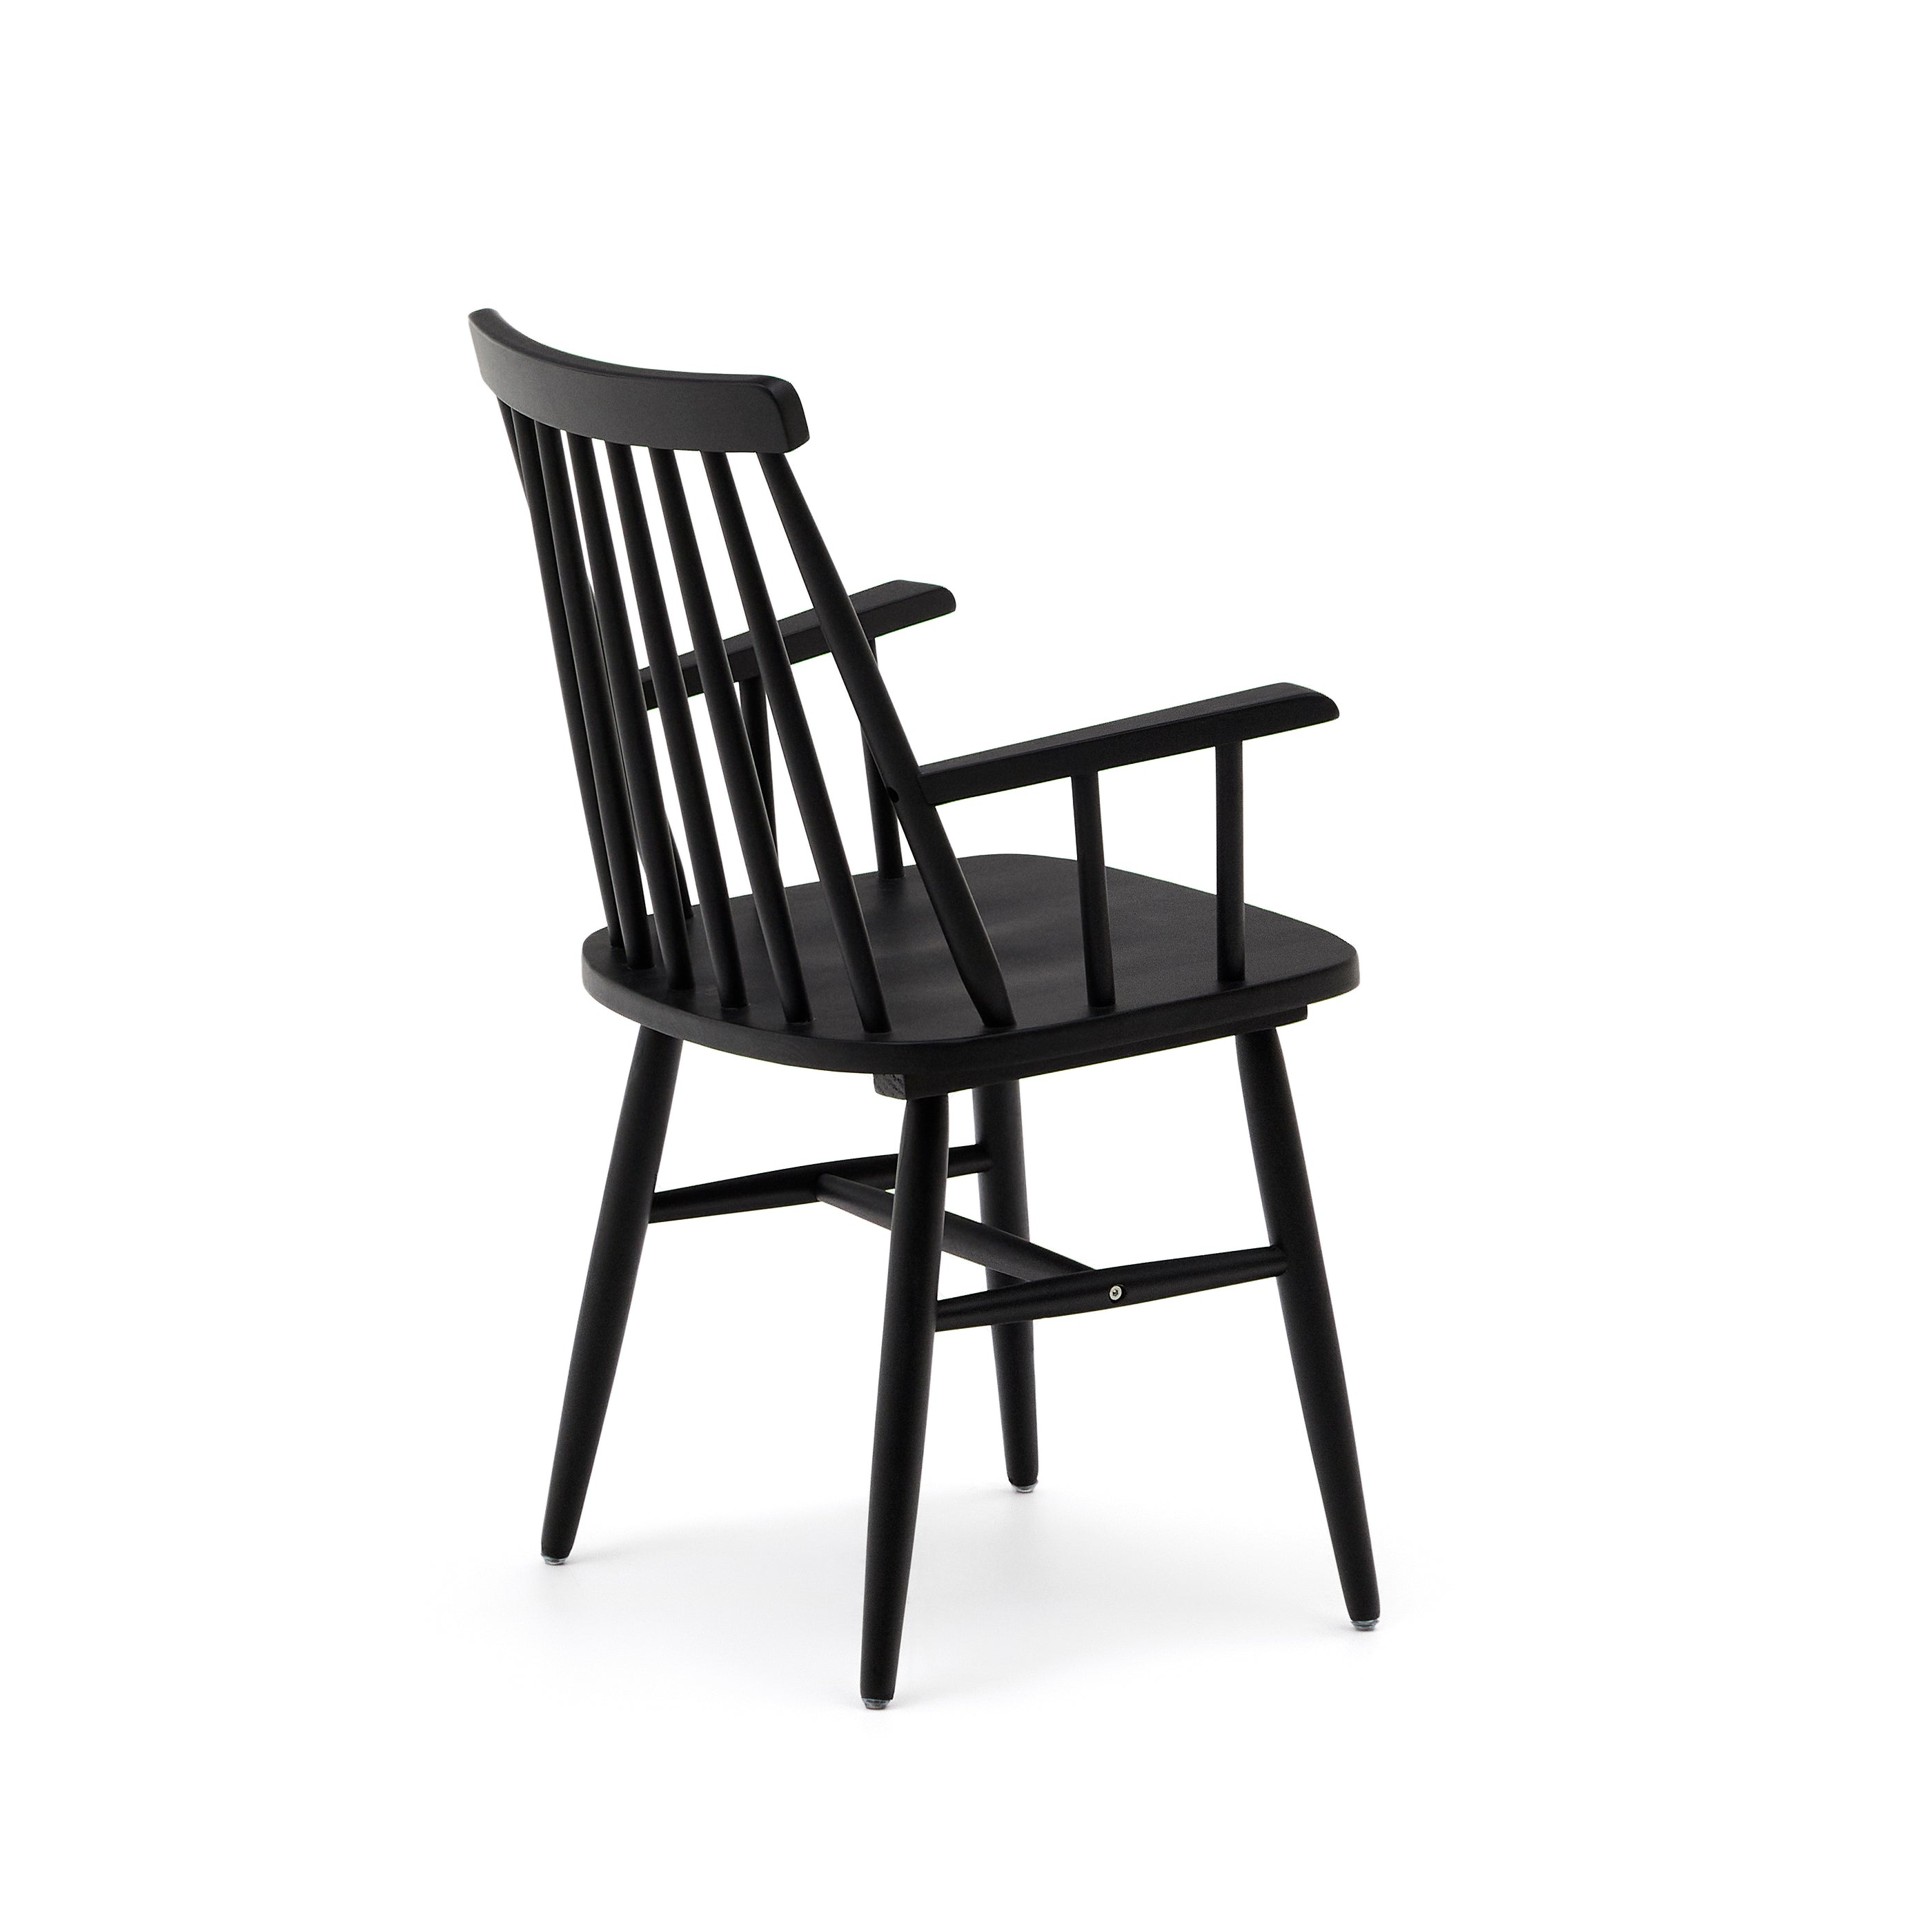 Black Tressia chair with armrests